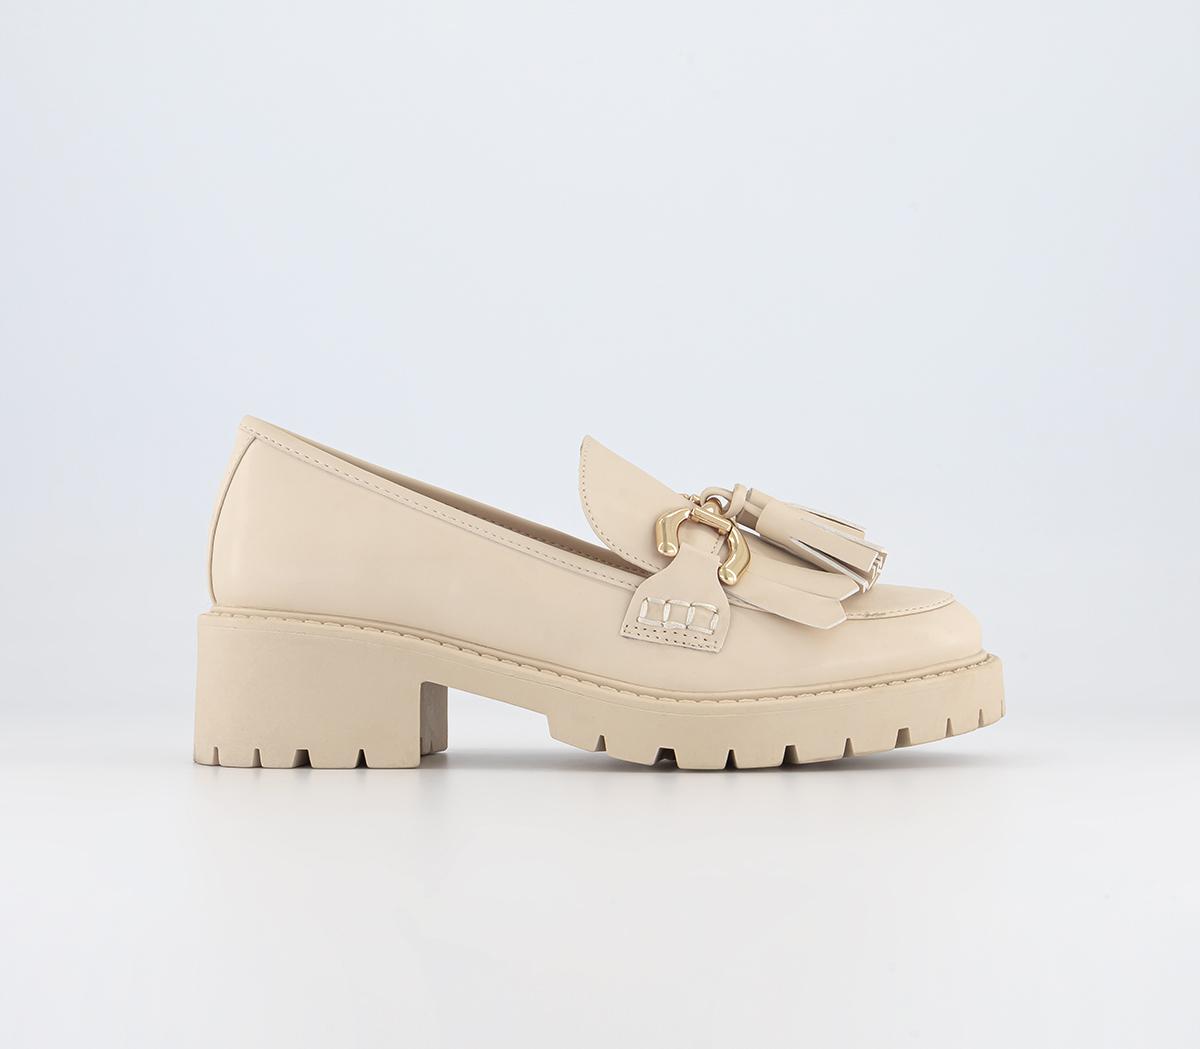 OFFICEFools Gold Chain LoafersOff White Patent